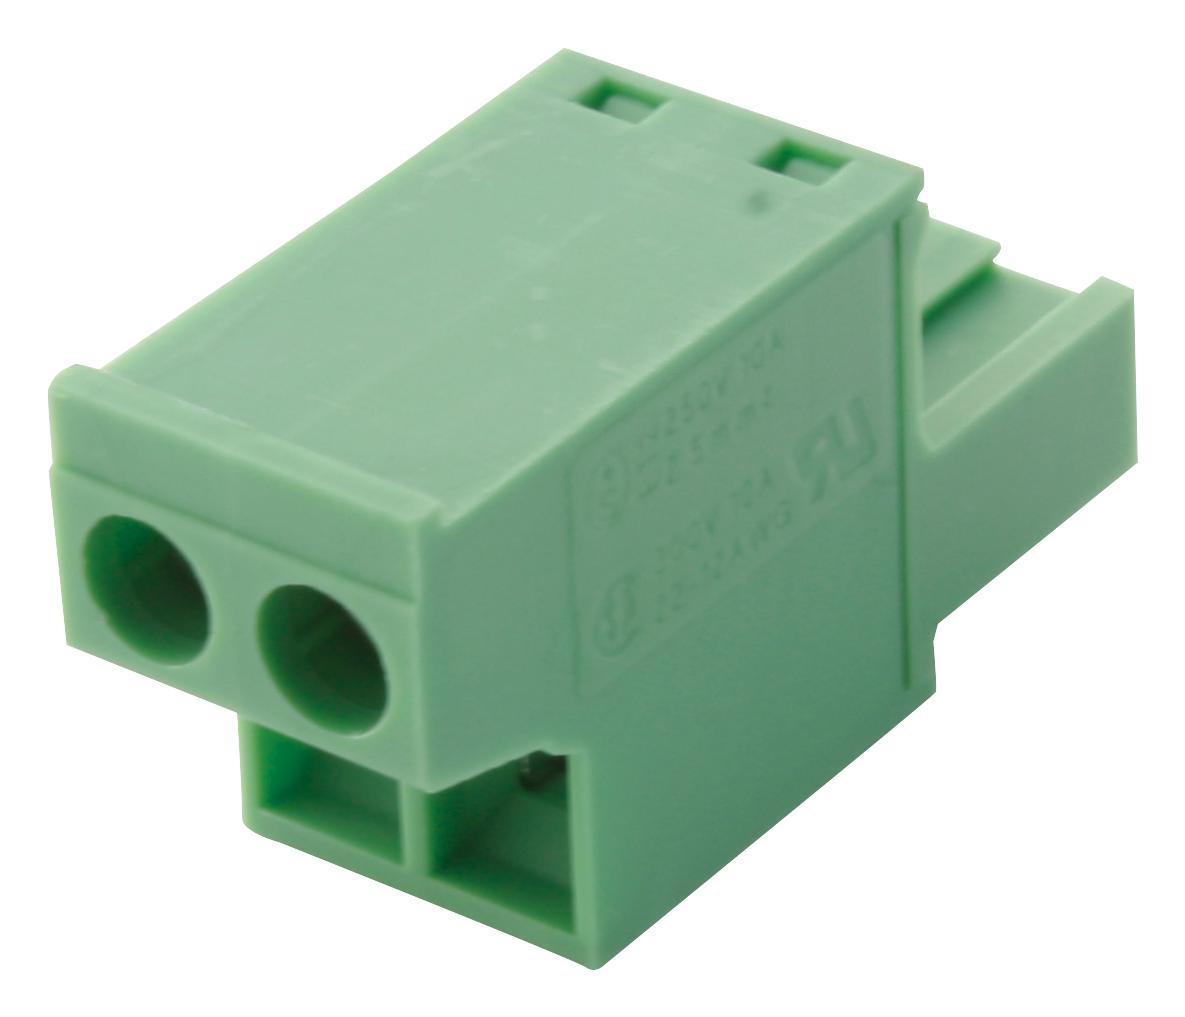 FRONT-MSTB2,5/4-ST-5,08 TERMINAL BLOCK, PLUGGABLE, 4POS, 12AWG PHOENIX CONTACT